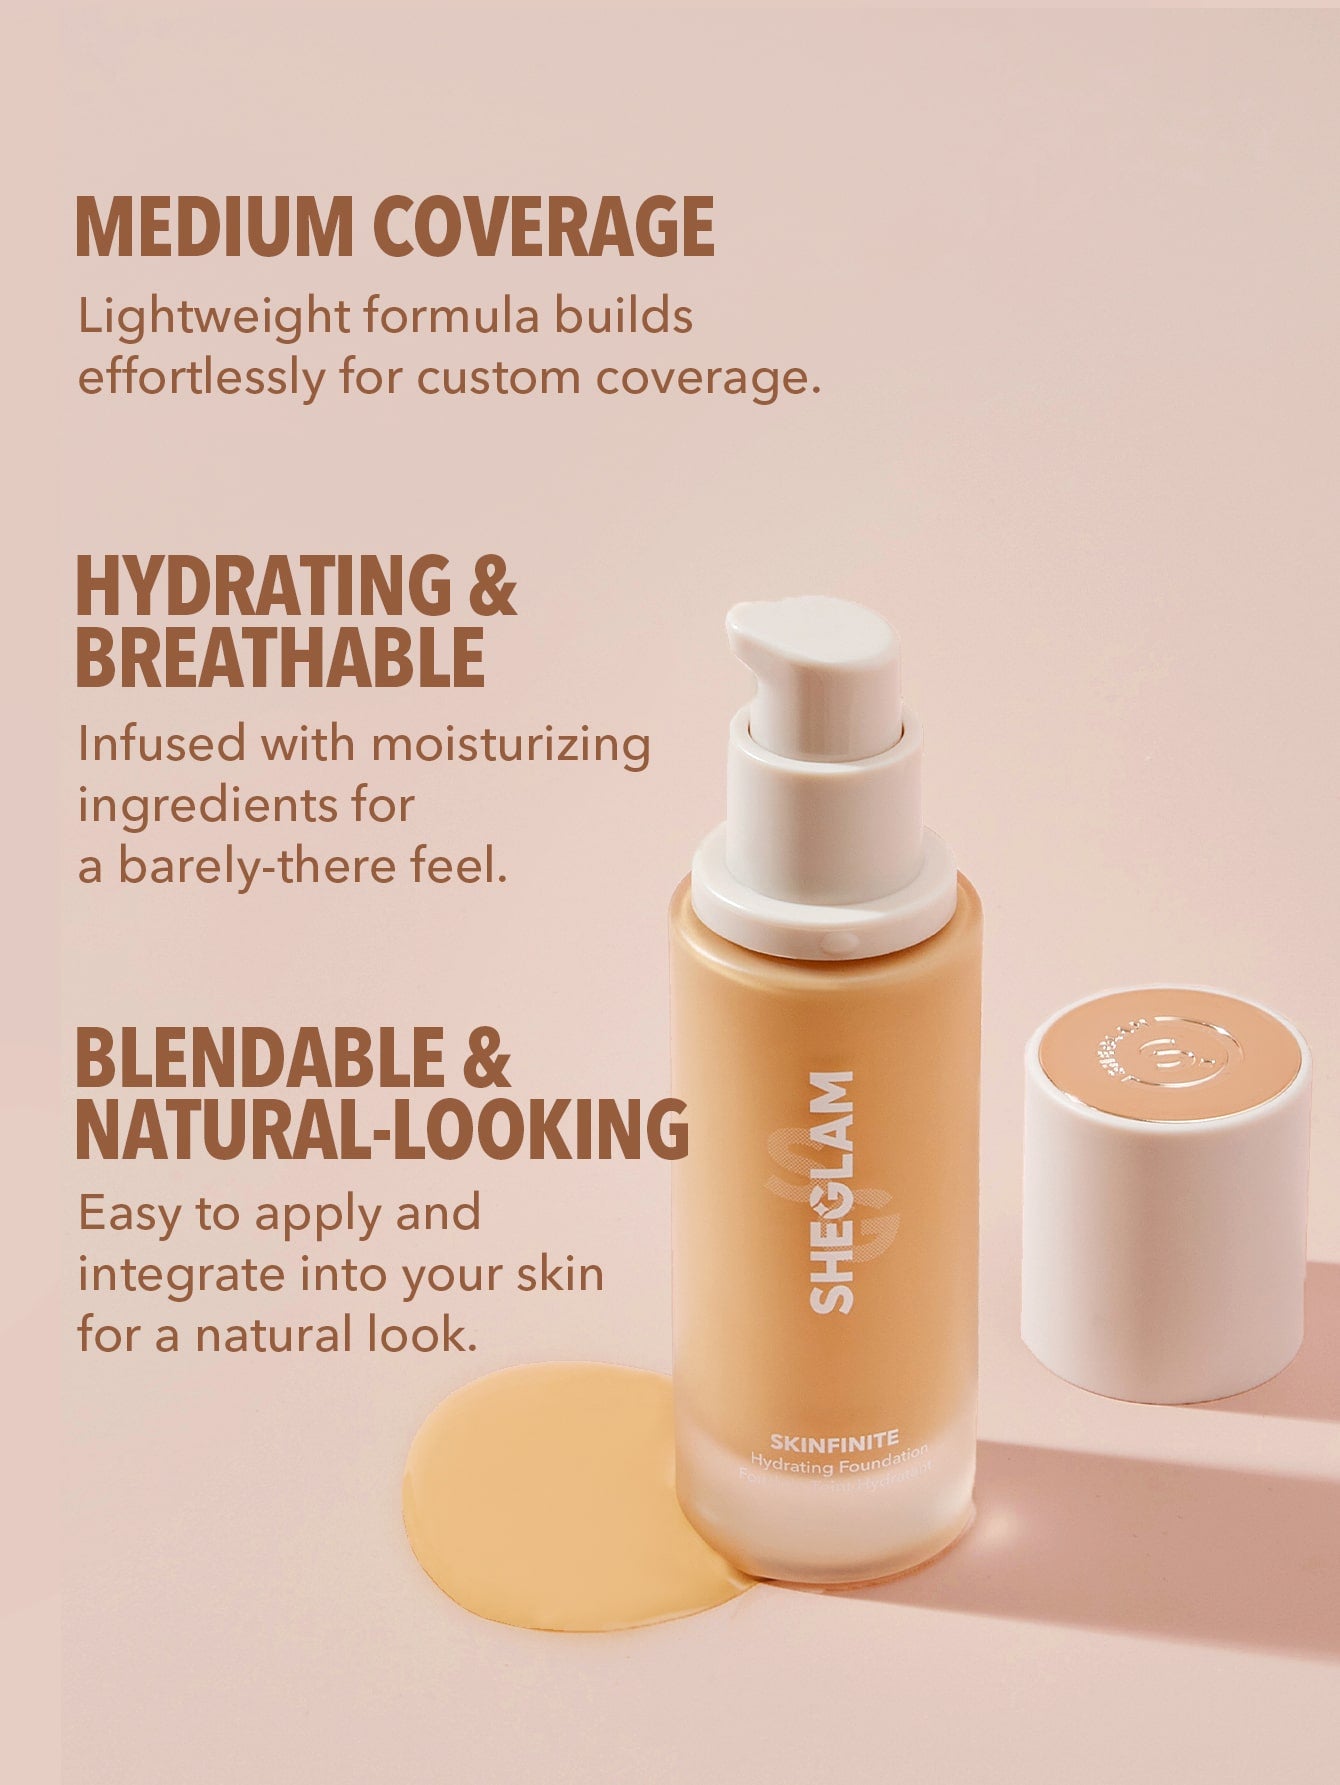 SHEGLAM Skinfinite Hydrating Foundation Sample Fair Flawless Dewy Foundation Hydrating Coverage Invisible Pore Concealer Poreless Non Greasy Lightweight Natural Soft Liquid Foundation